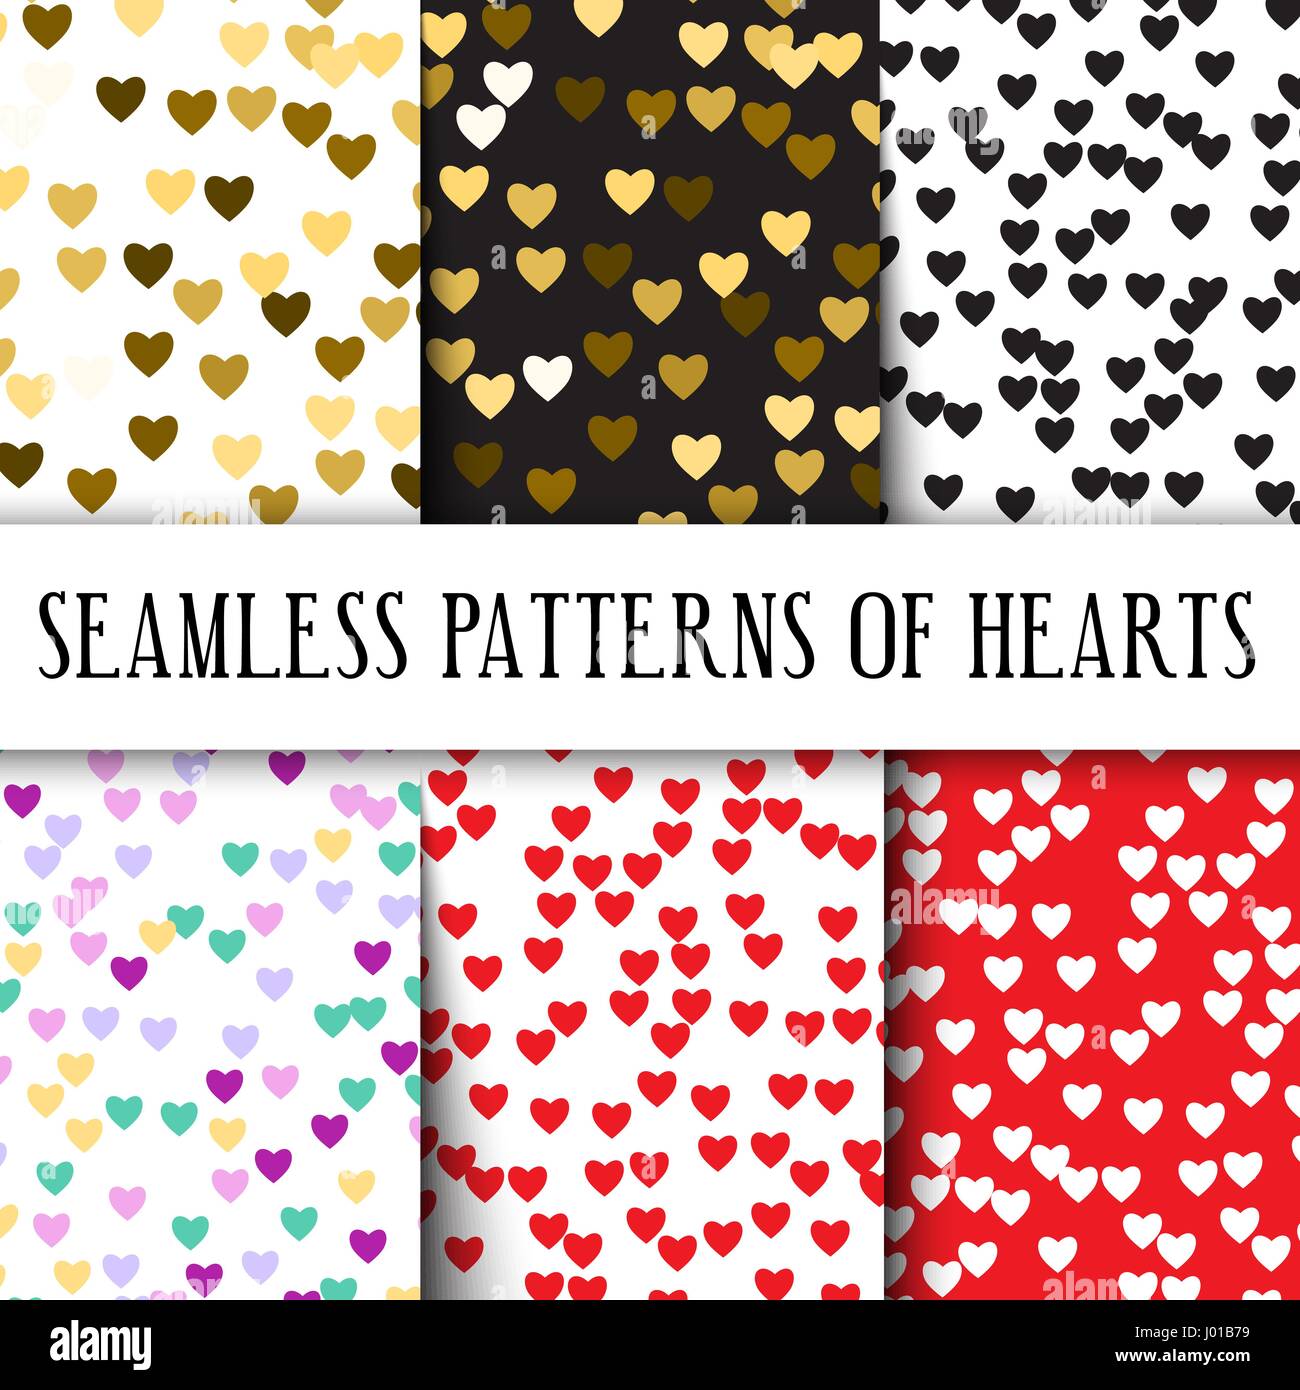 vector set of seamless patterns with hearts. Perfect for Valentine s day, weddings or romantic gifts.  Stock Vector